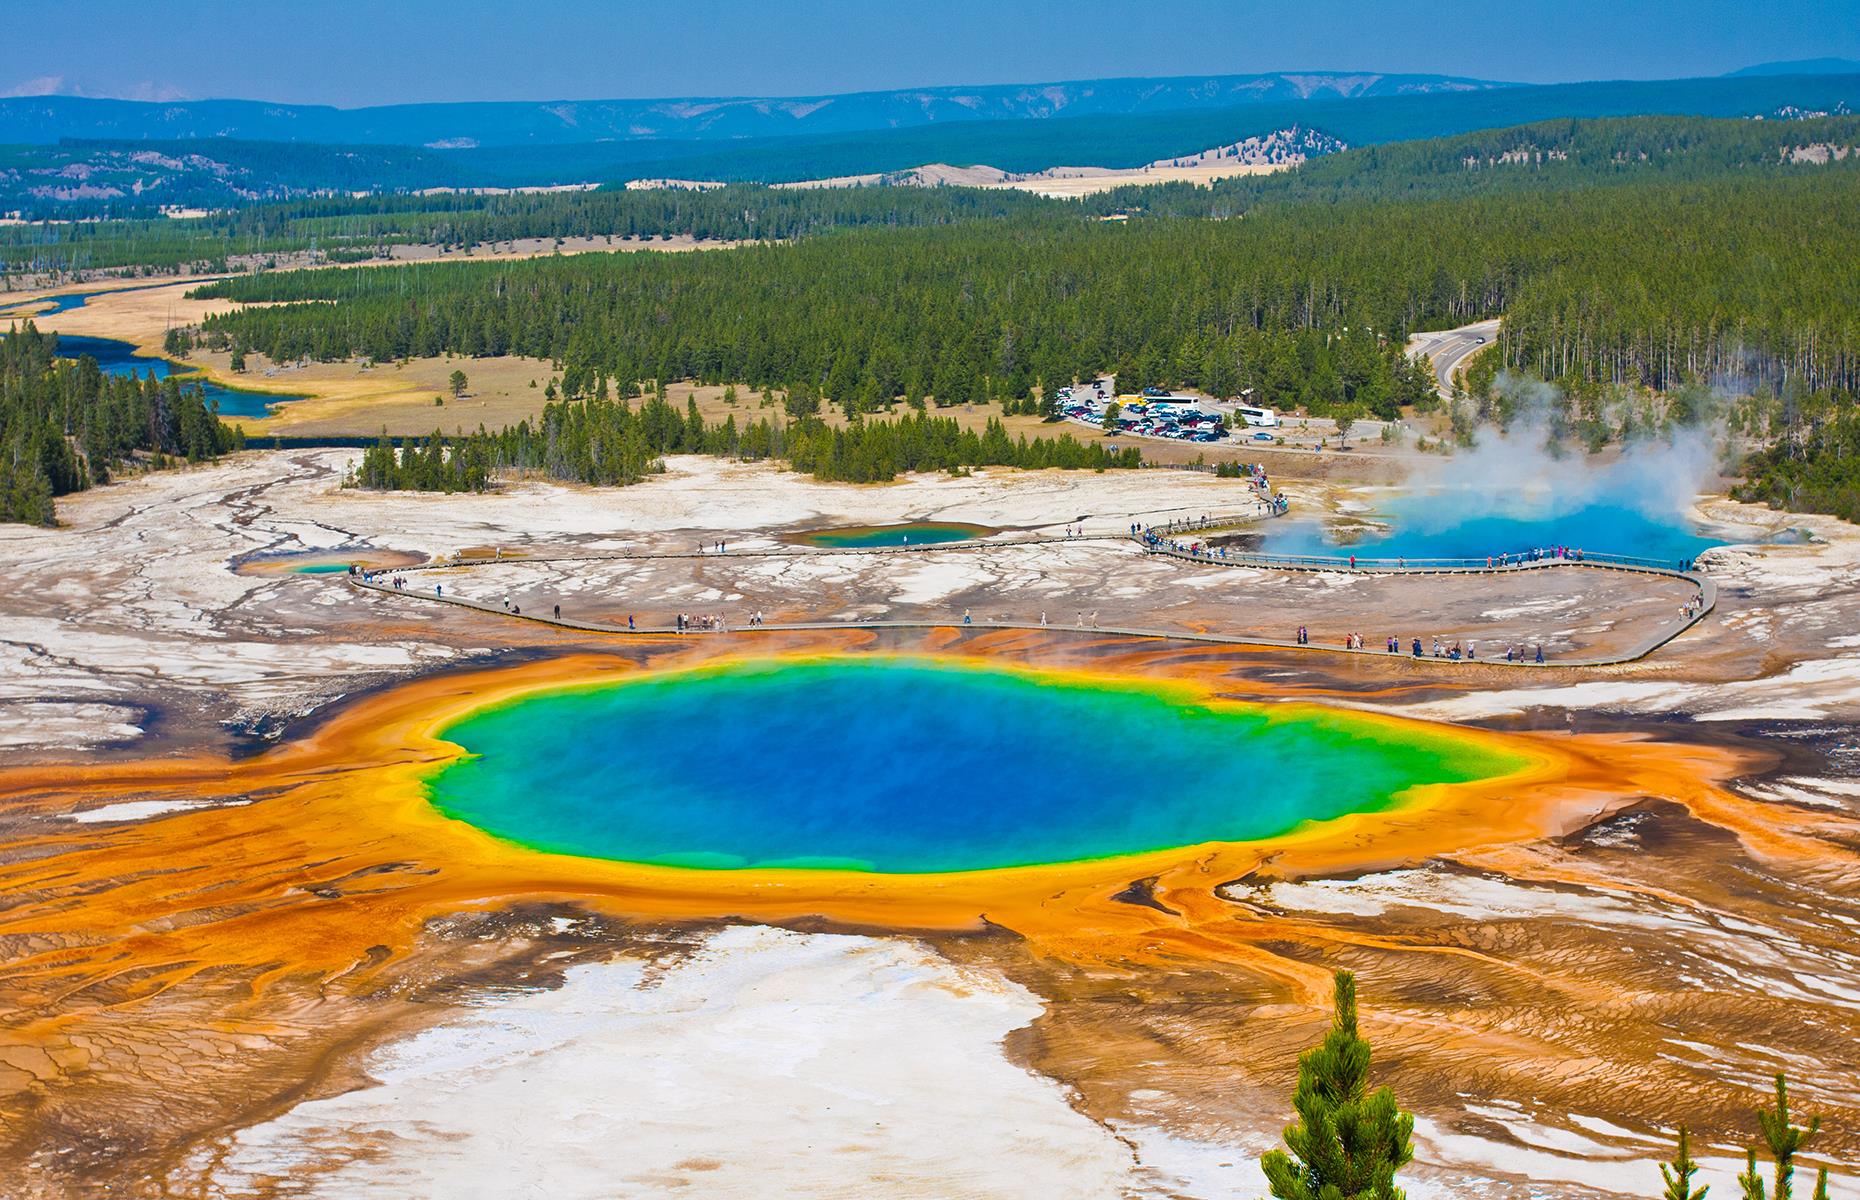 <p>America's very first national park is keeping up with the EV trend too. There are six charging points across <a href="https://www.nps.gov/articles/evcharging.htm">Yellowstone</a>, in locations close to some of the park's most breathtaking wonders, from Old Faithful to Yellowstone Fishing Bridge. Once you're all set, strike into the park to discover spurting geysers, kaleidoscopic springs and wildlife from bears to bison. You can charge up at the North and West entrance too.</p>  <p><a href="https://www.loveexploring.com/news/76305/of-bison-and-bears-why-yellowstone-reminds-us-of-our-place-on-the-planet"><strong>Of bison and bears: why Yellowstone reminds us of our place on the planet</strong></a></p>